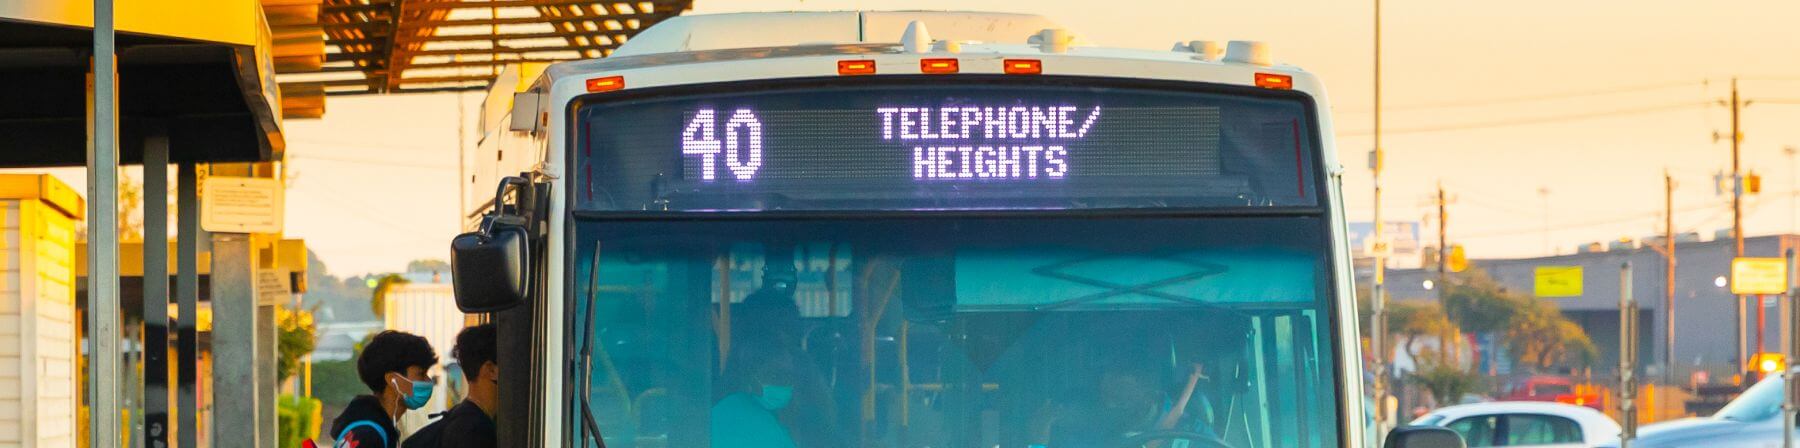 40 Telephone / Heights, METRO Bus Route